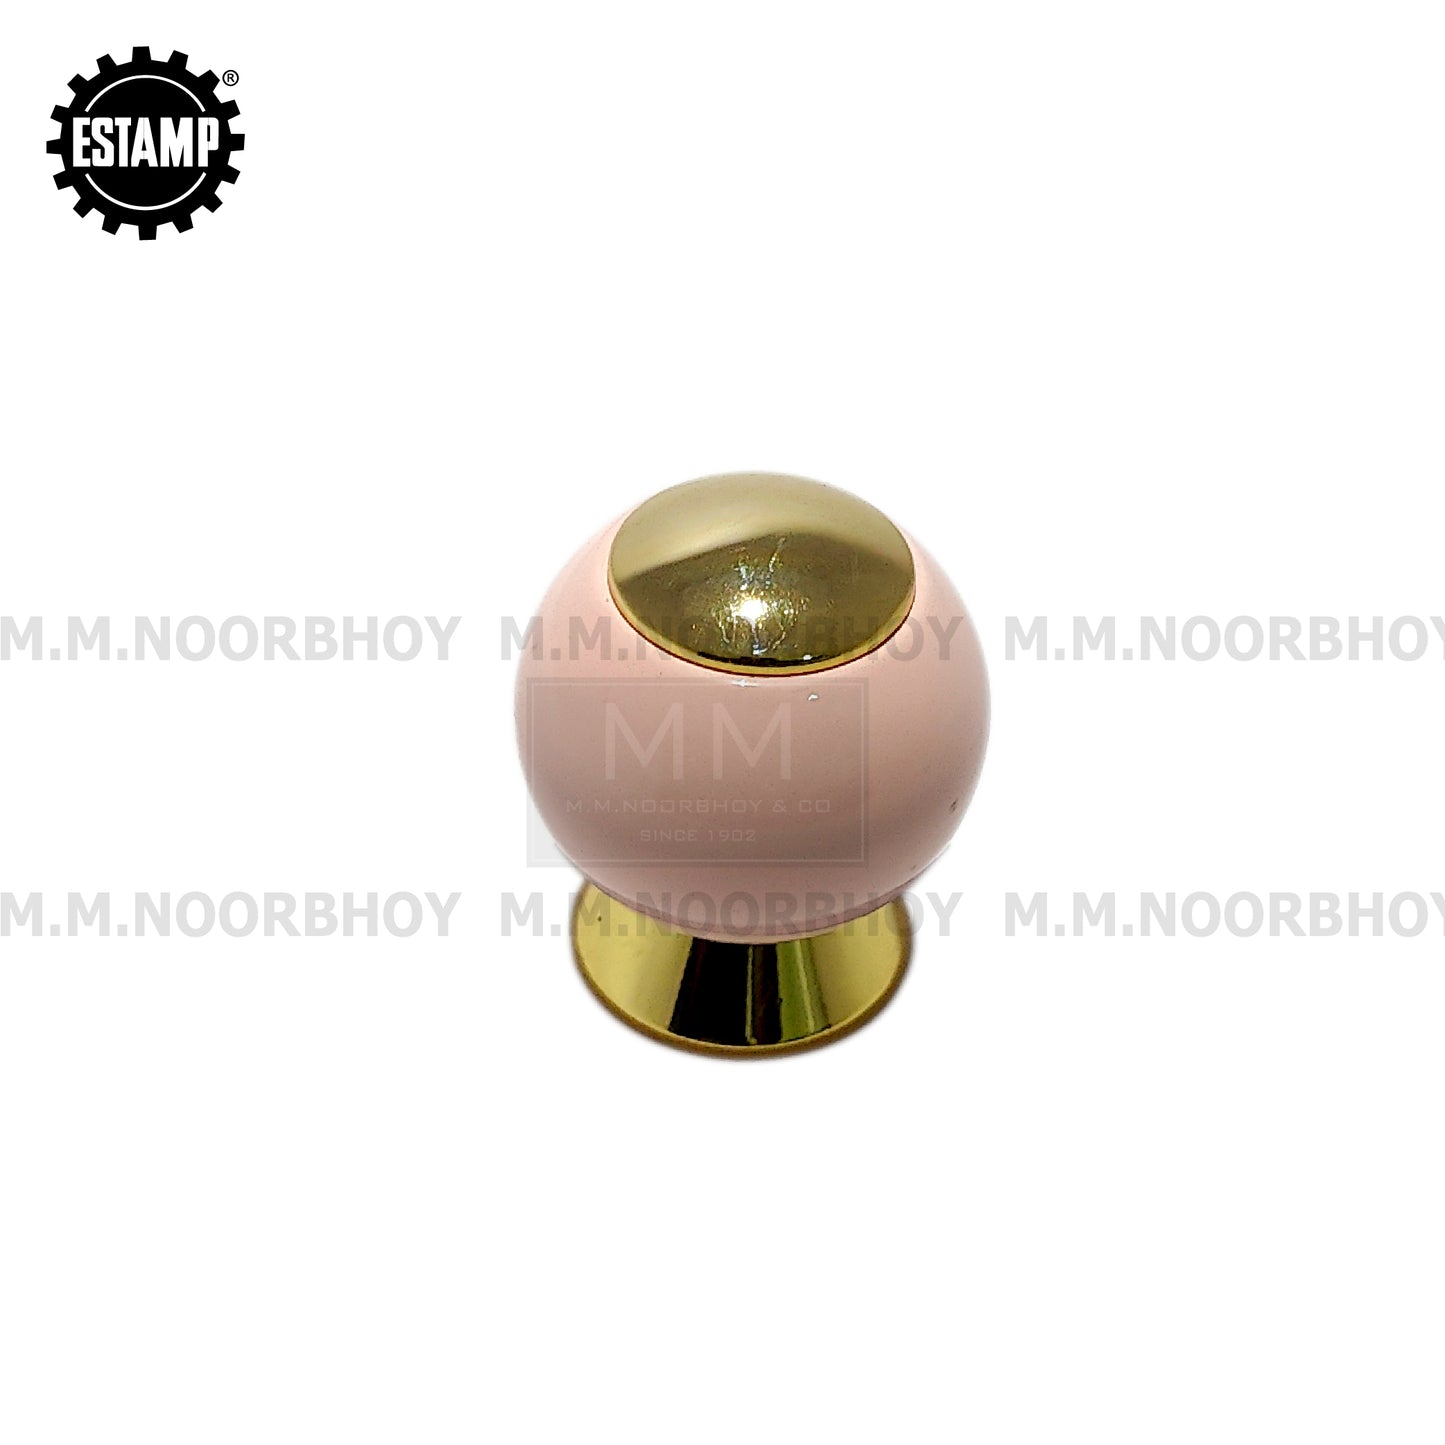 Estamp Gold Plated & Pink, Red Knob Each - 5591